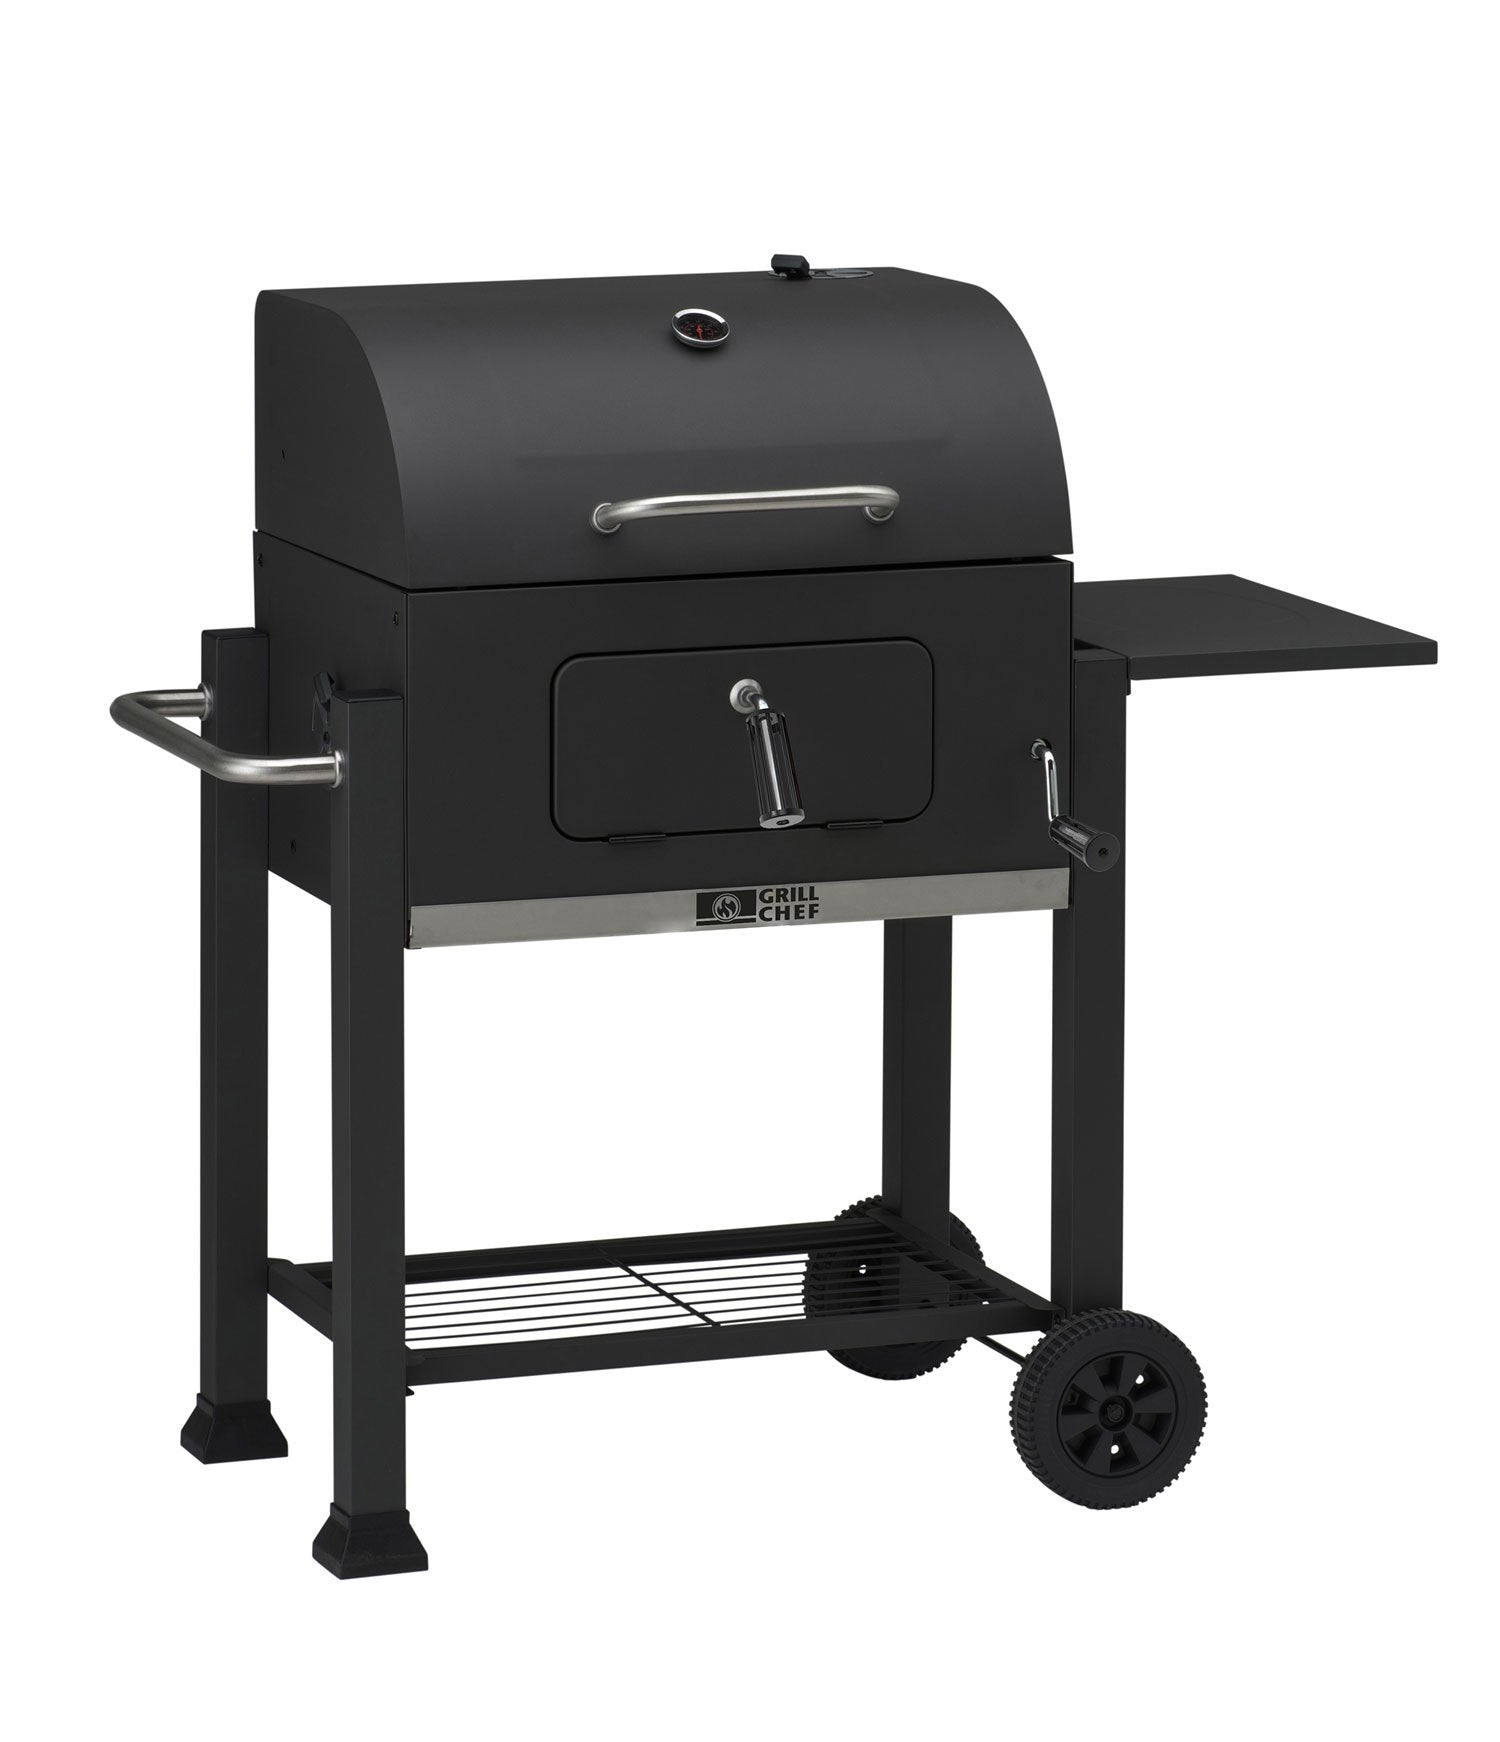 Landmann-GrillChef-Tennessee-Broiler-Charcoal-Grill-Cart